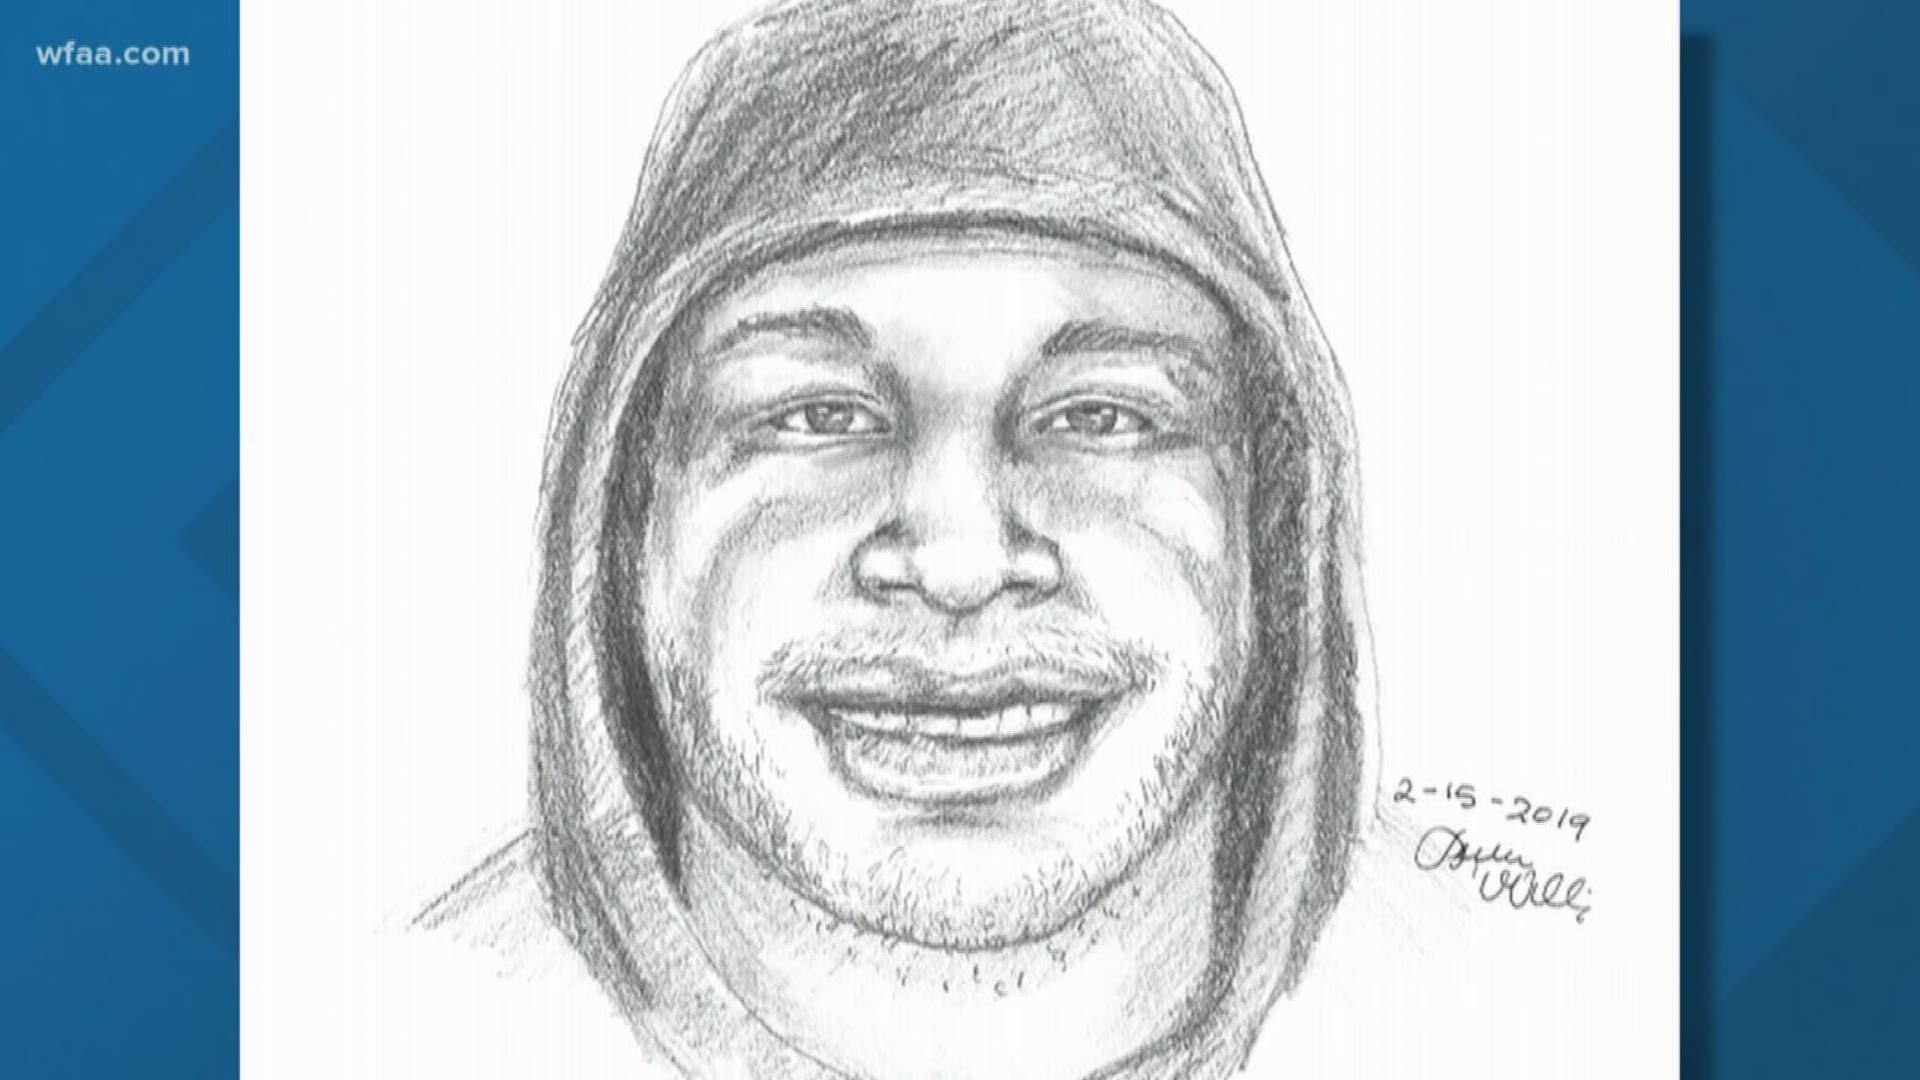 The sketch is of one of two suspects involved in the case.